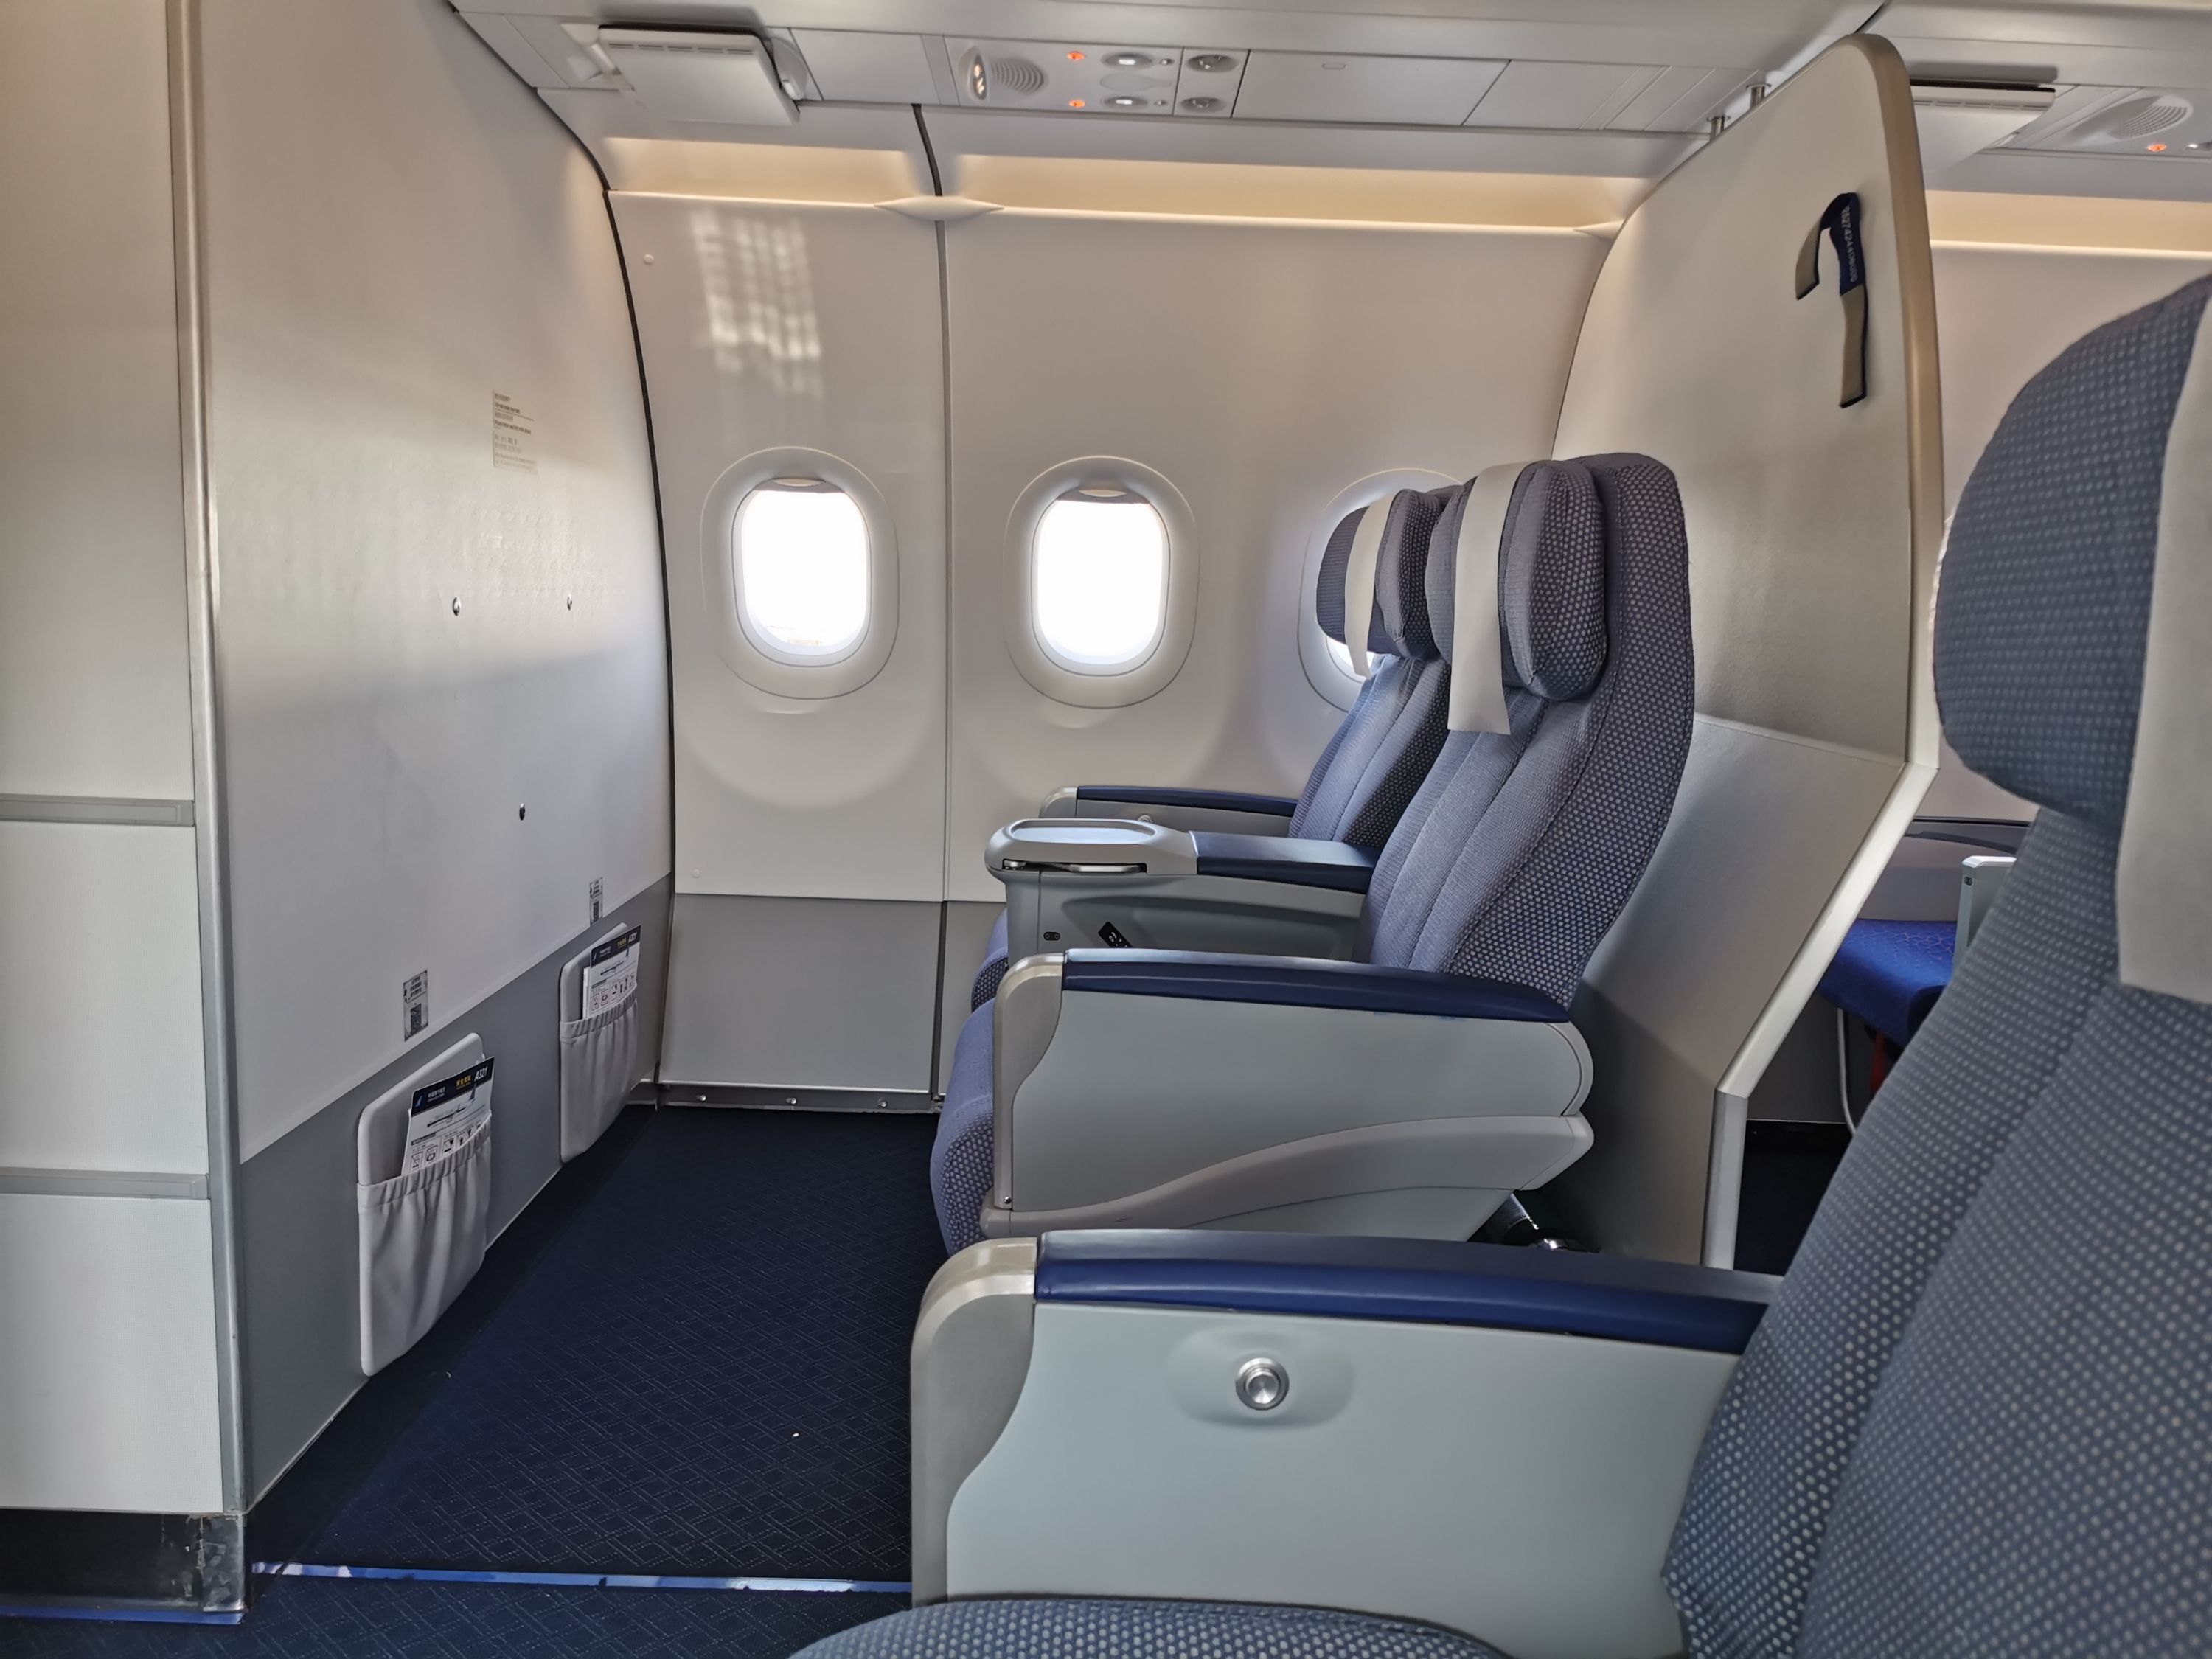 Airbus A319 Seat Maps, Specs & Amenities | Delta Air Lines